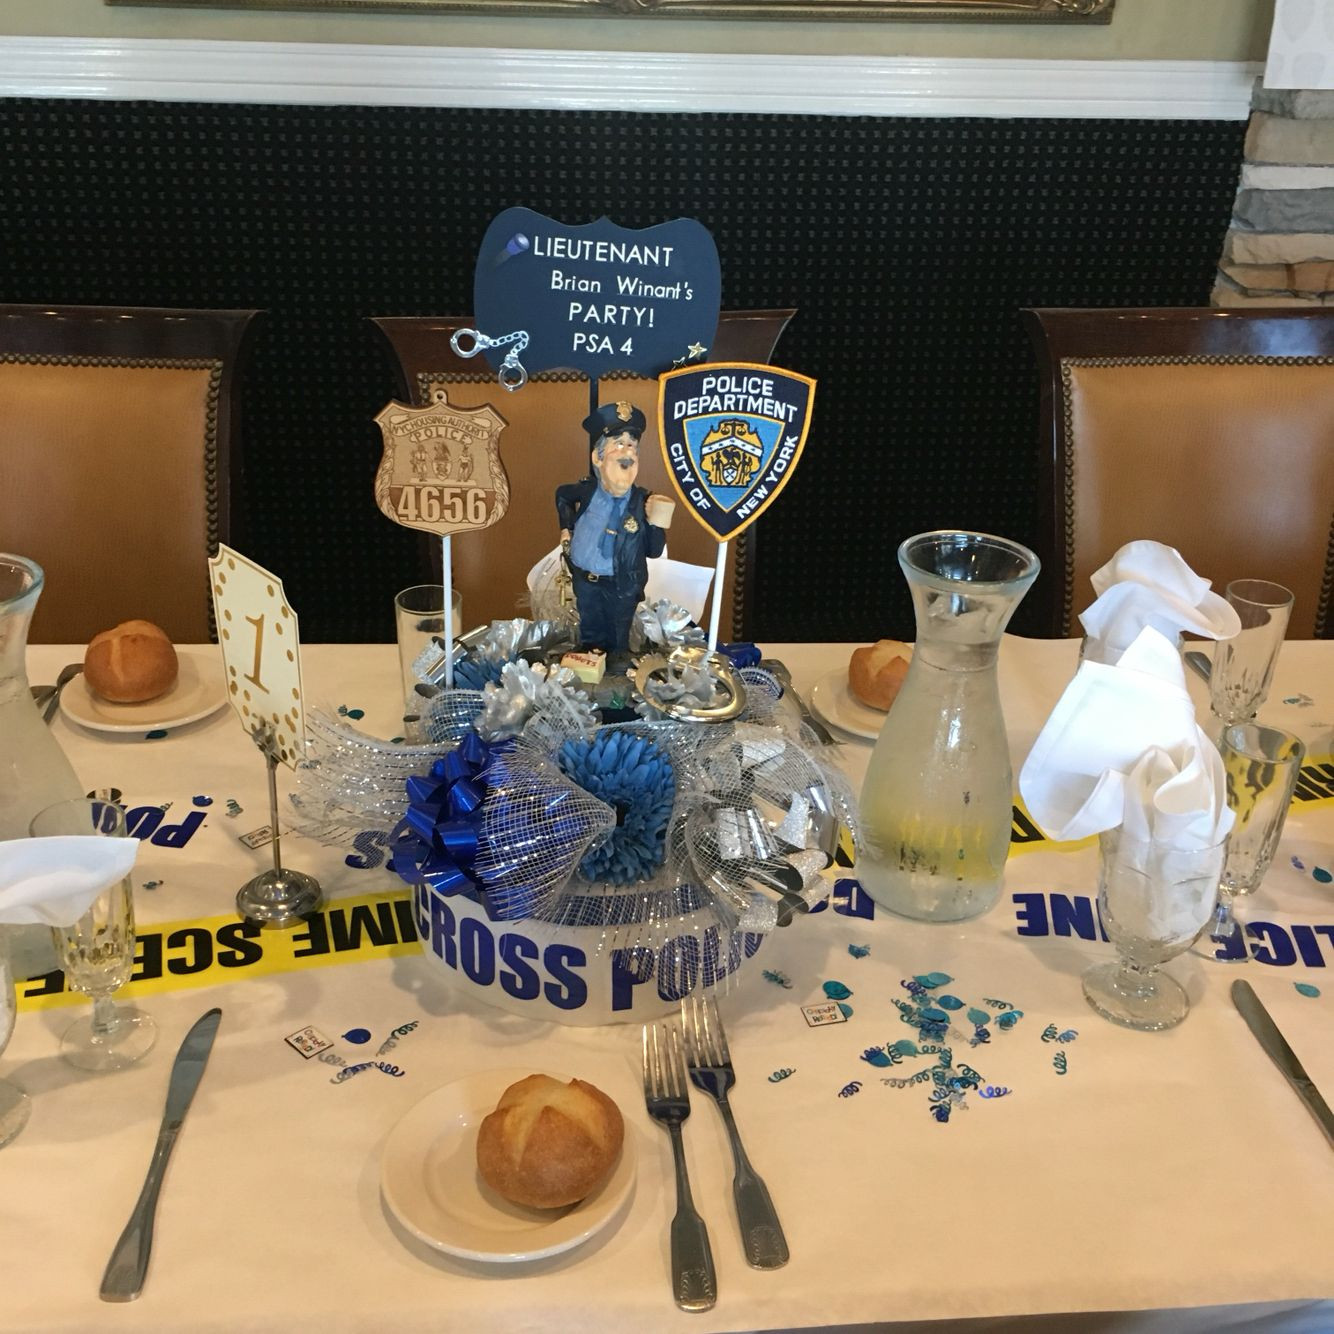 Retirement Party Table Centerpiece Ideas
 Pin by Yelena W on Police retirement party DIY